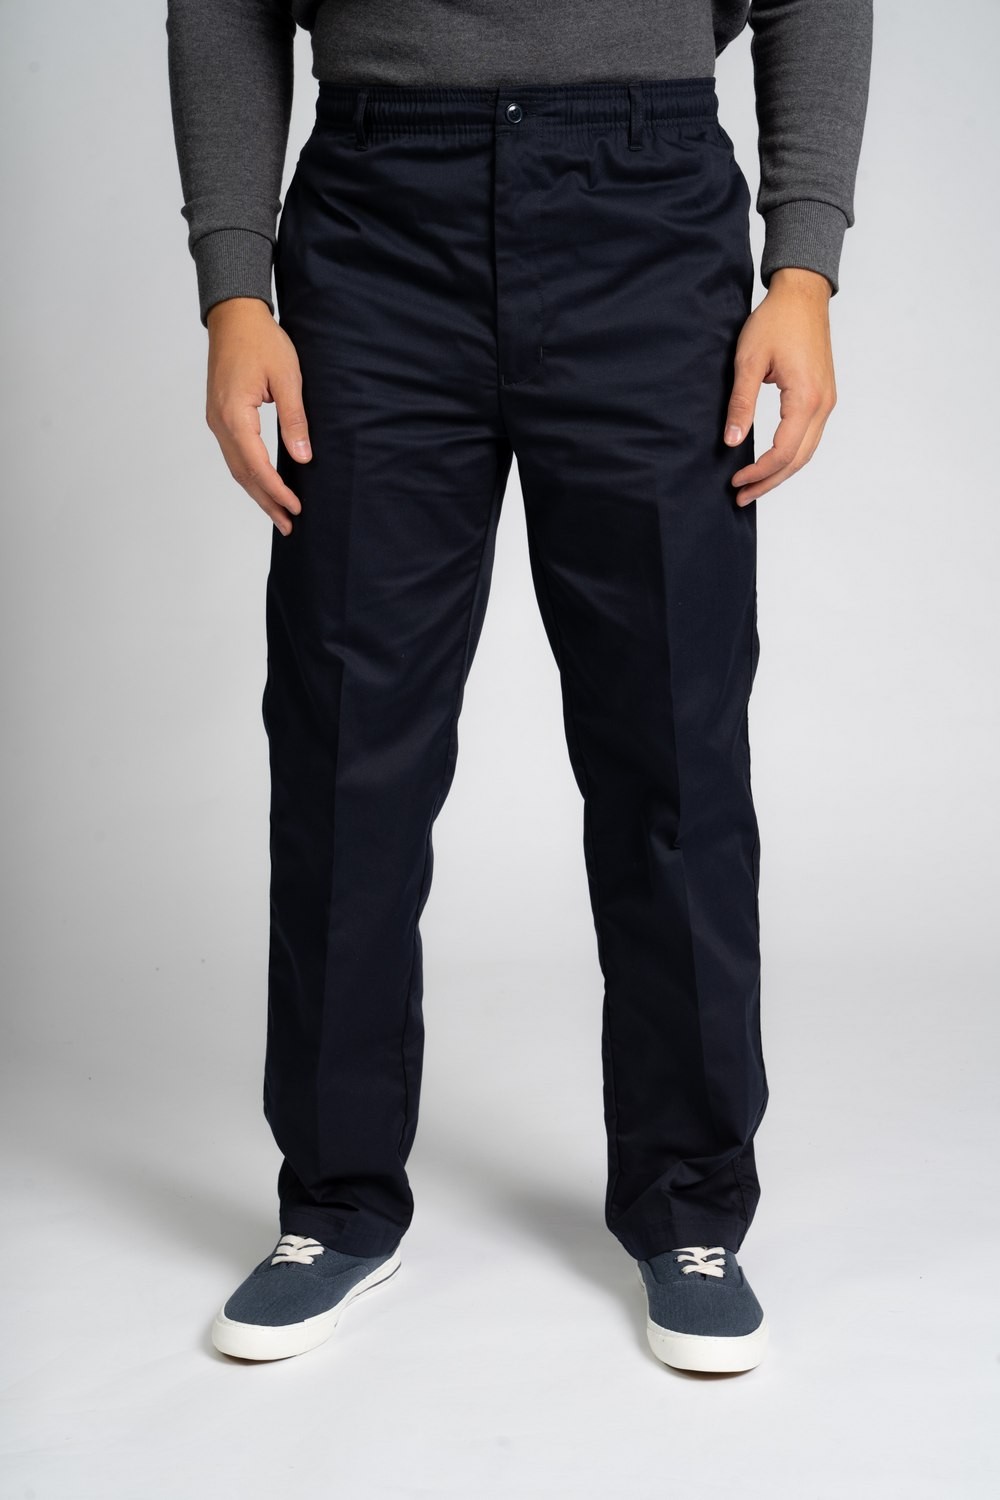 Carabou GTR Trousers Navy size 34S